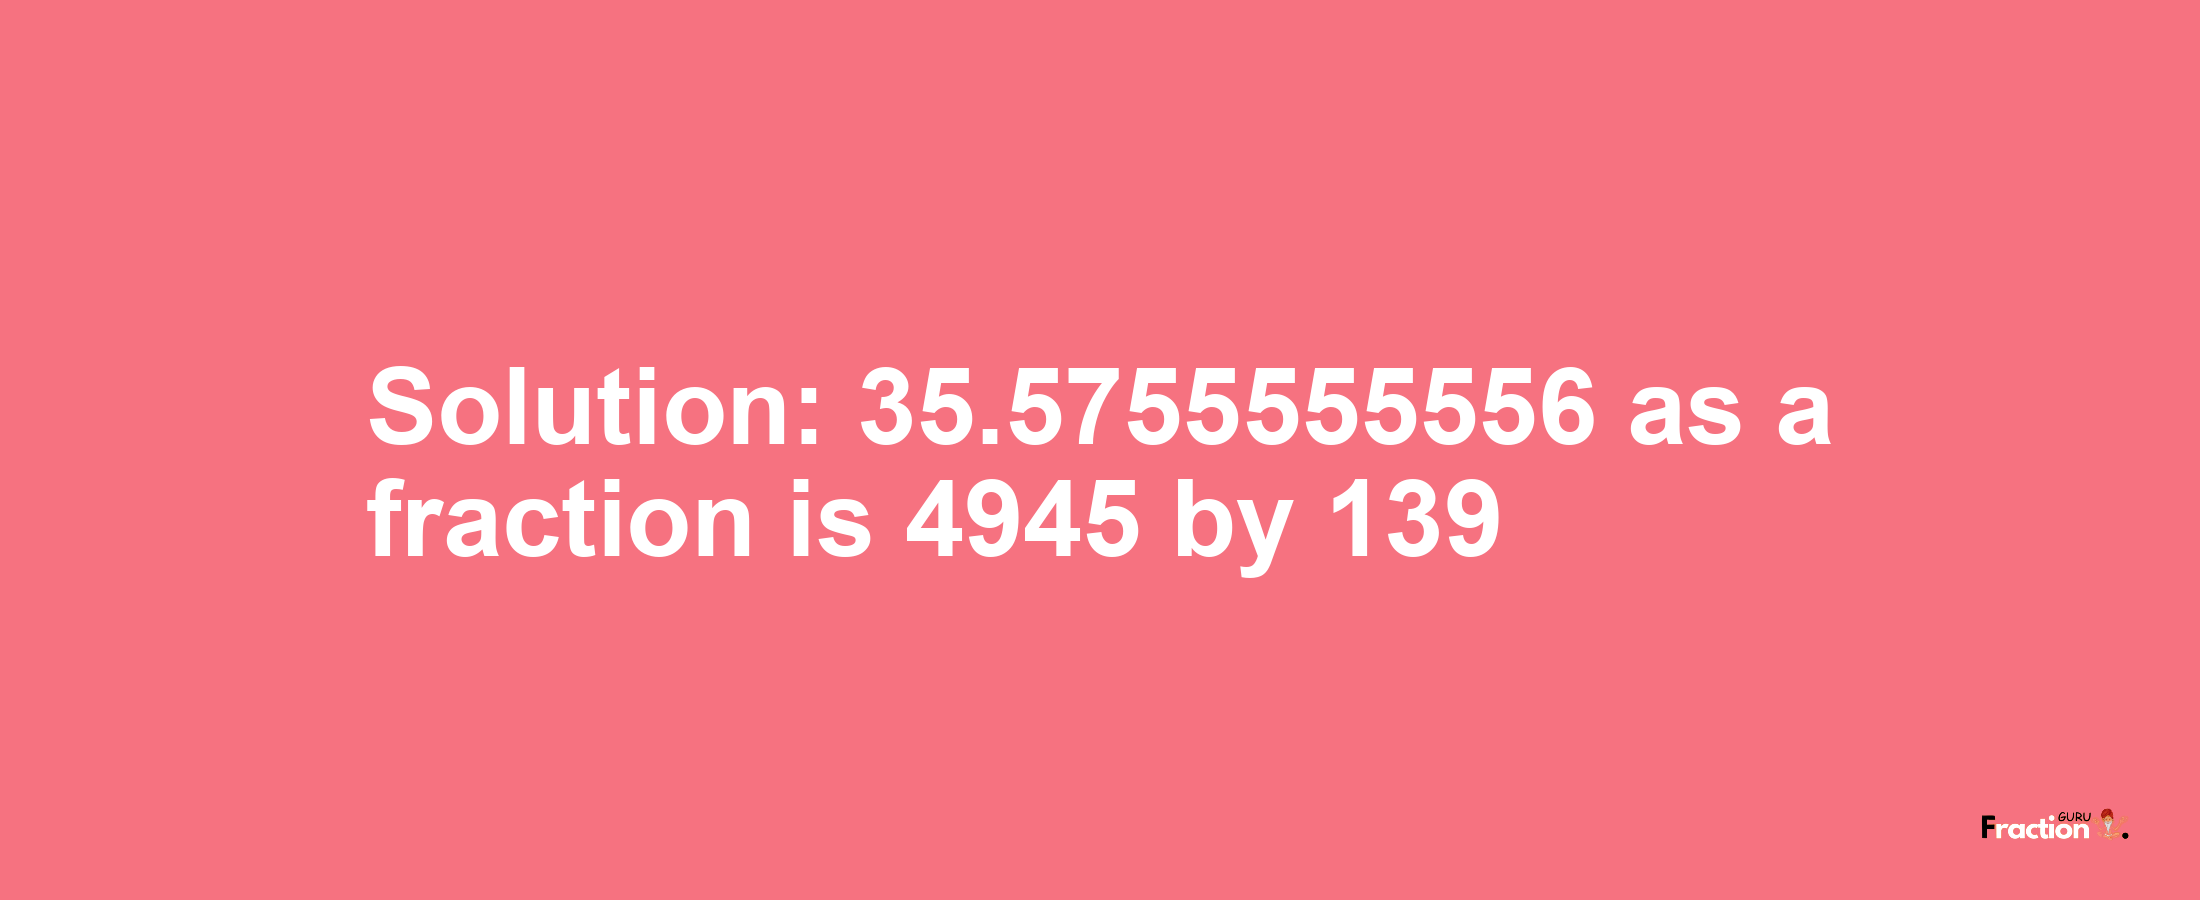 Solution:35.5755555556 as a fraction is 4945/139